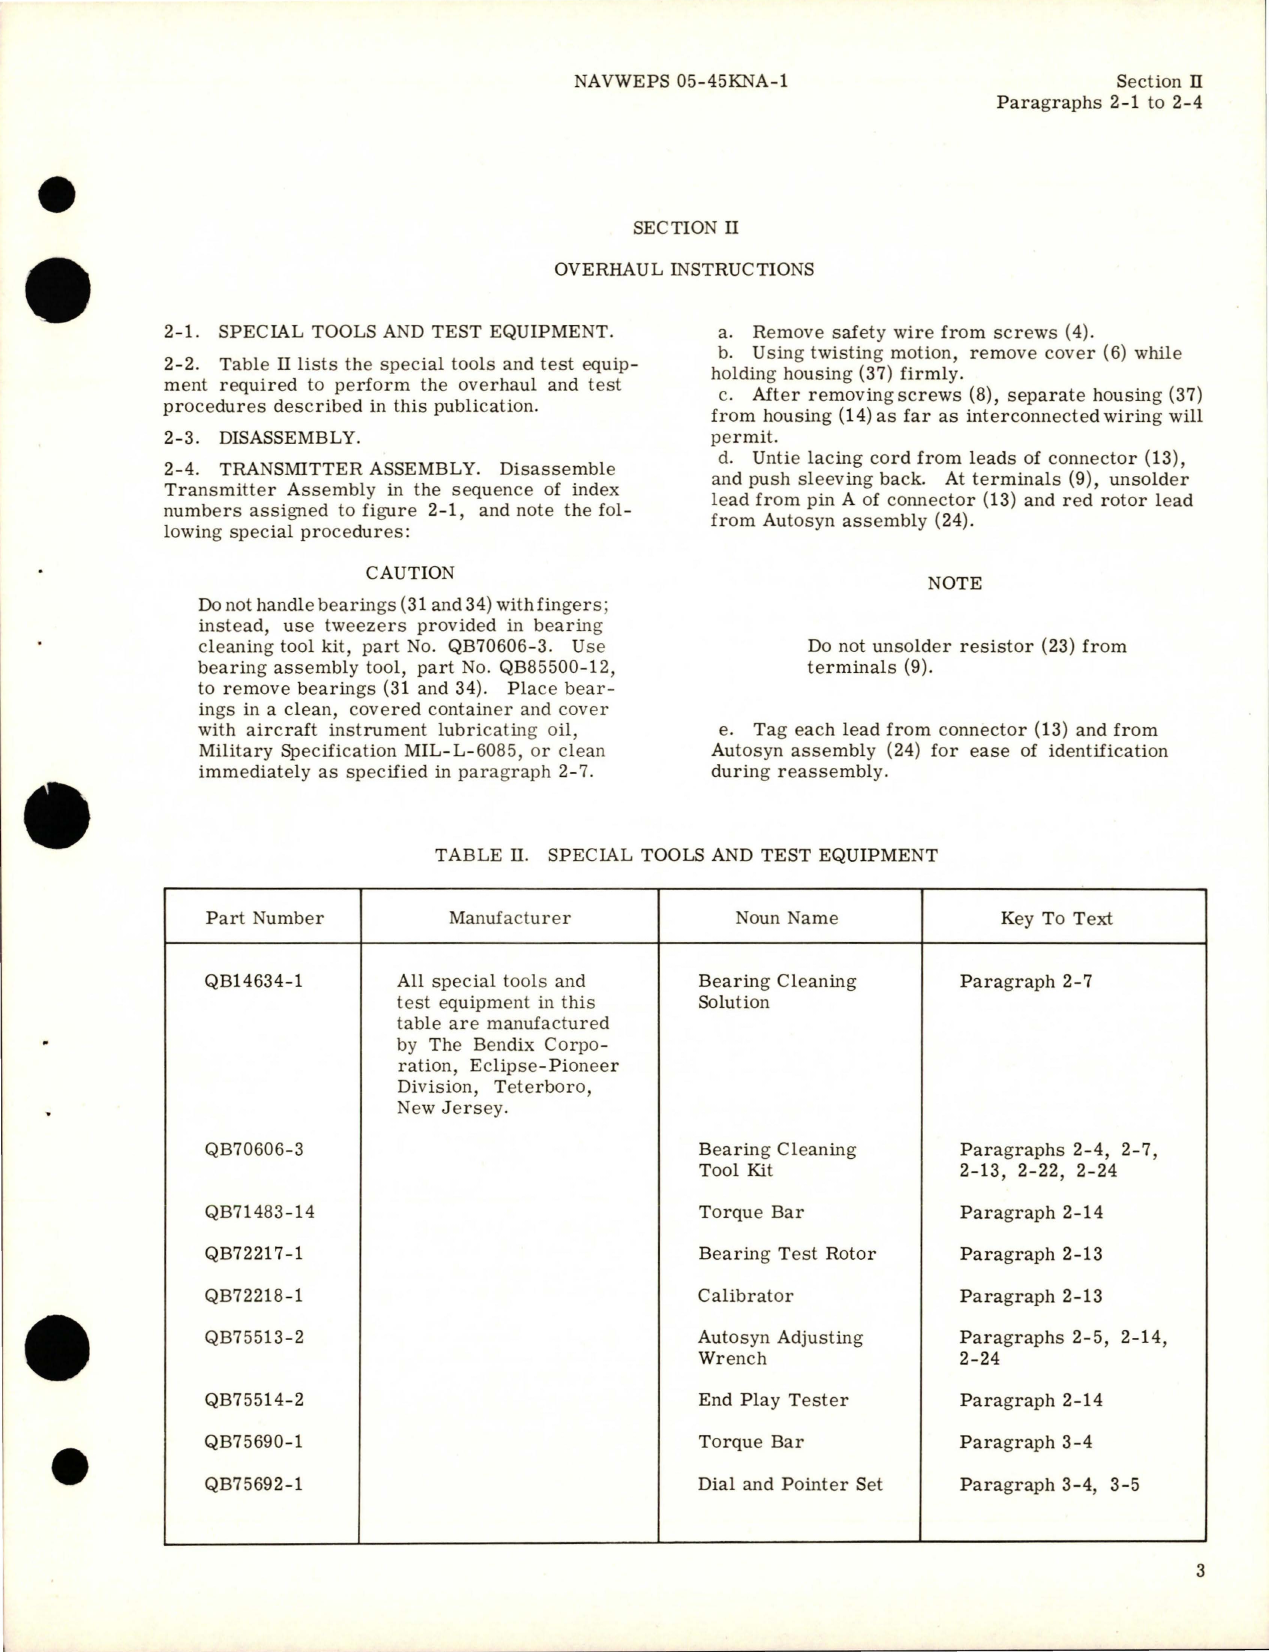 Sample page 7 from AirCorps Library document: Overhaul Instructions for Single Position Transmitter Assembly - Type 4564-5A6-1